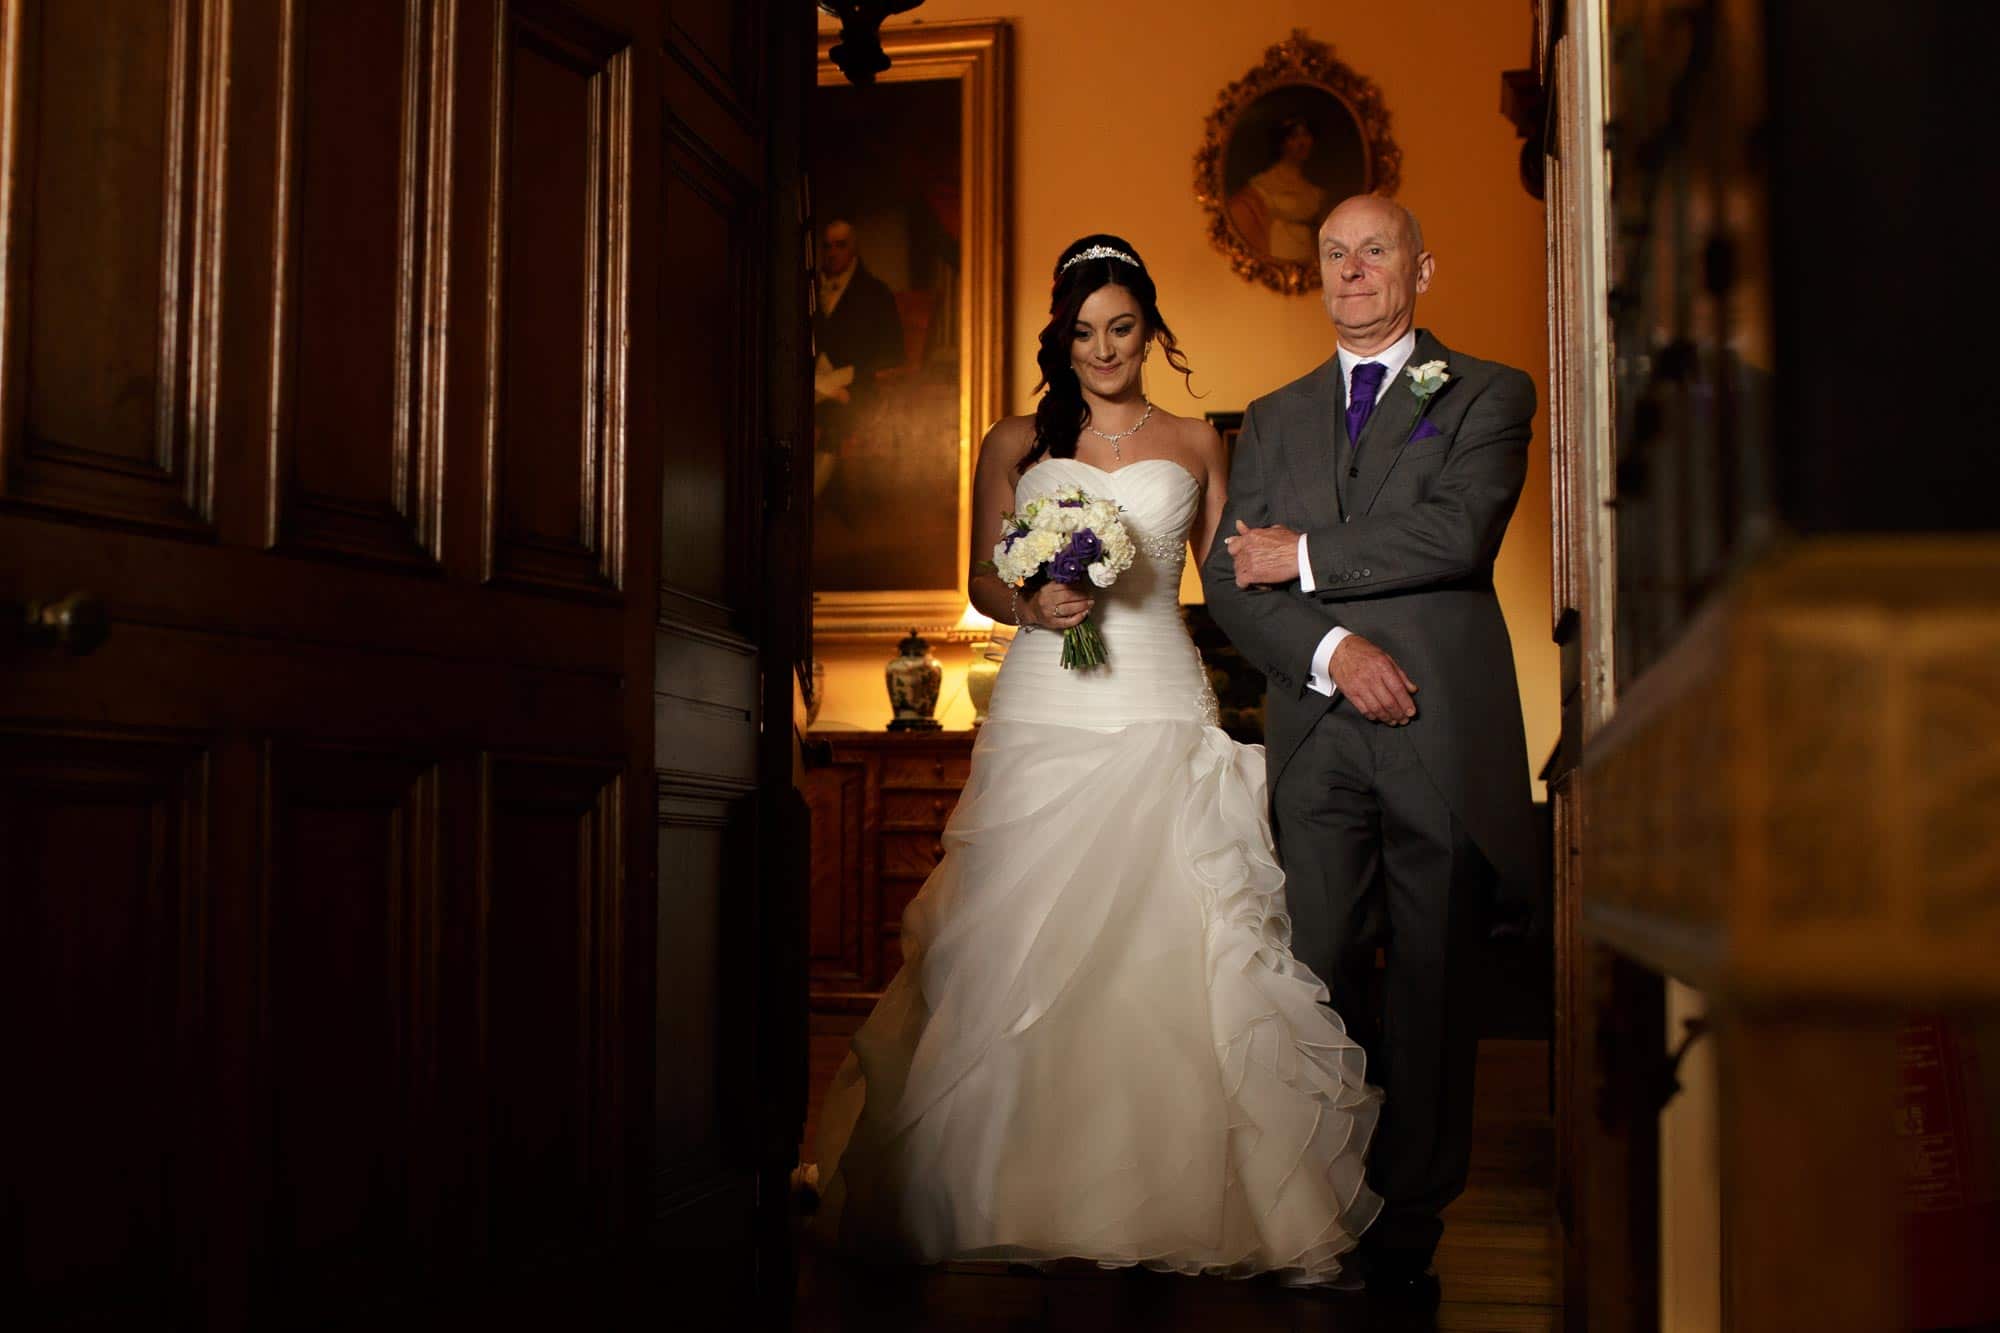 Father walking a bride down the aisle at Arley Hall wedding